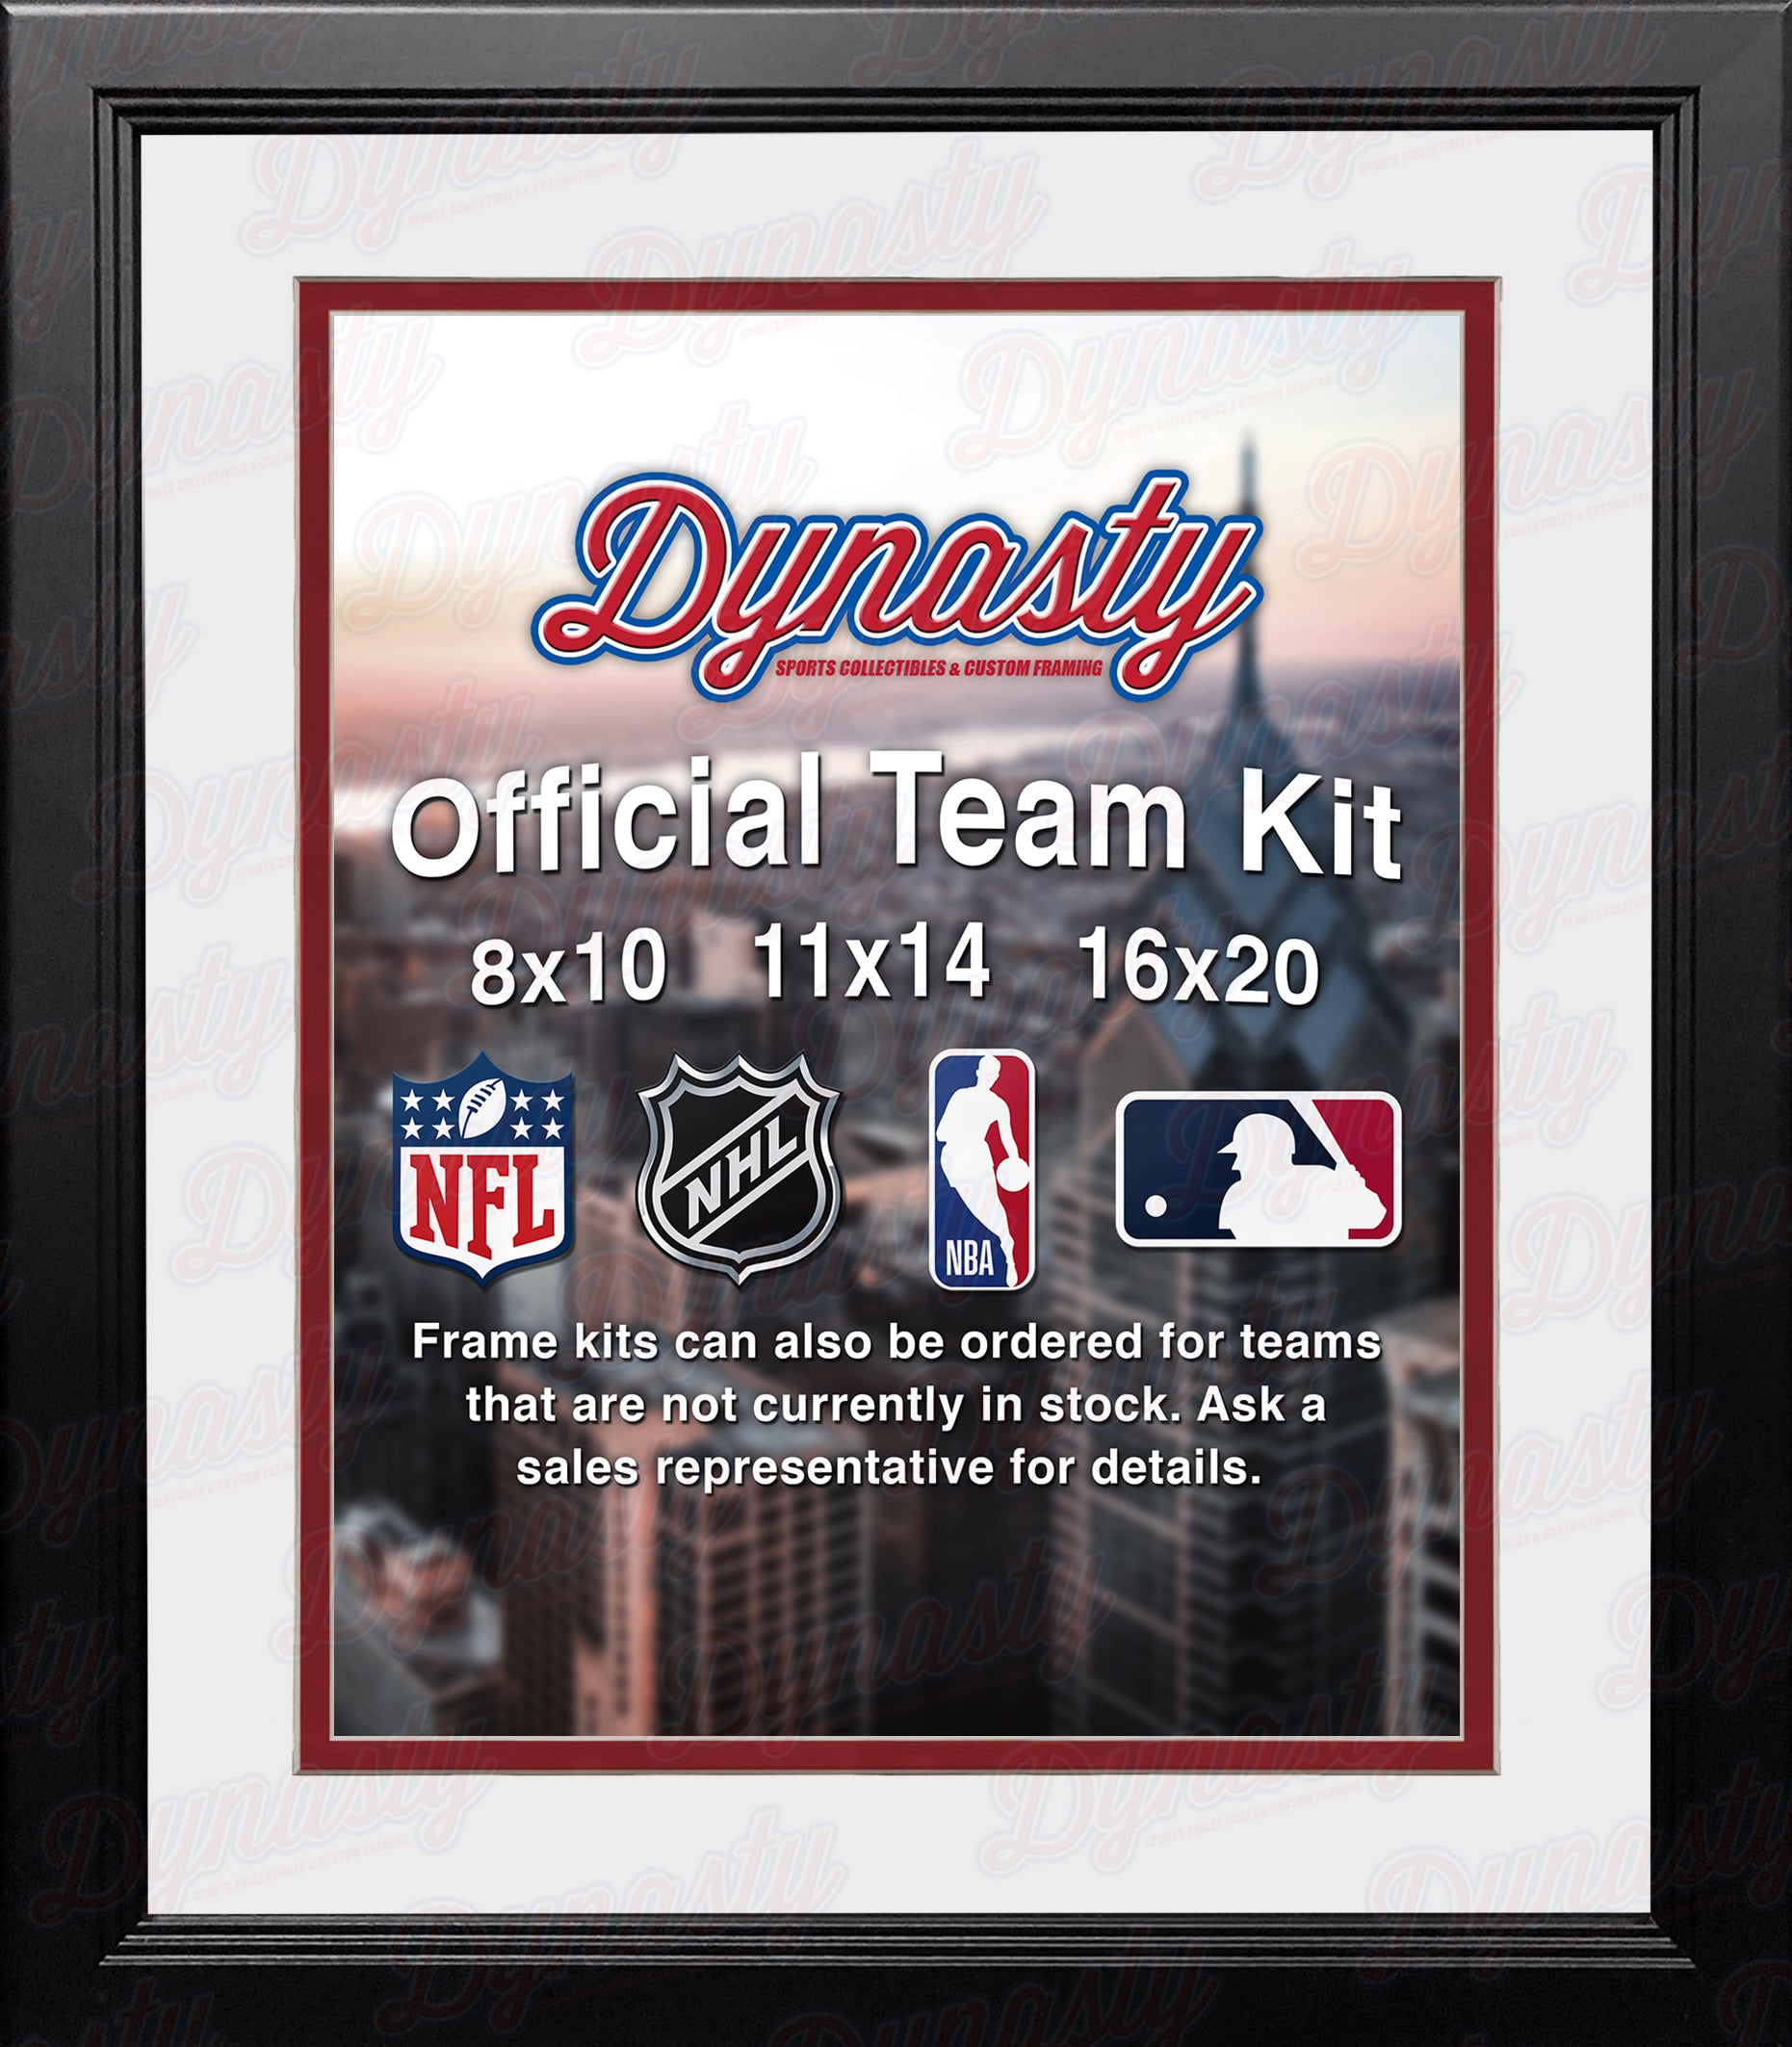 NHL Hockey Photo Picture Frame Kit - Detroit Red Wings (White Matting, Red Trim) - Dynasty Sports & Framing 